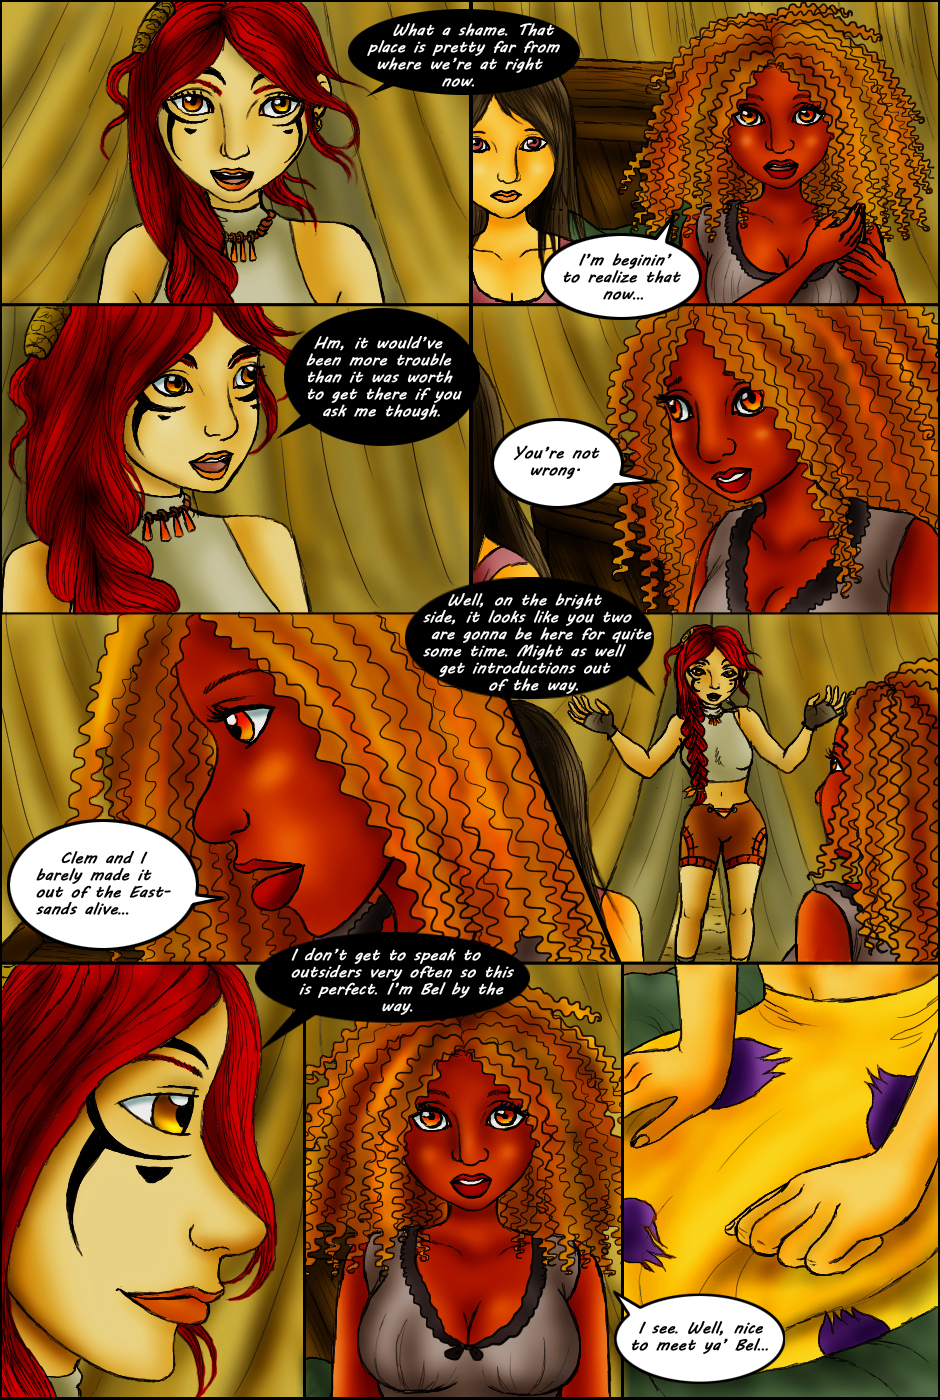 Page 278 – An Unlikely Acquaintance